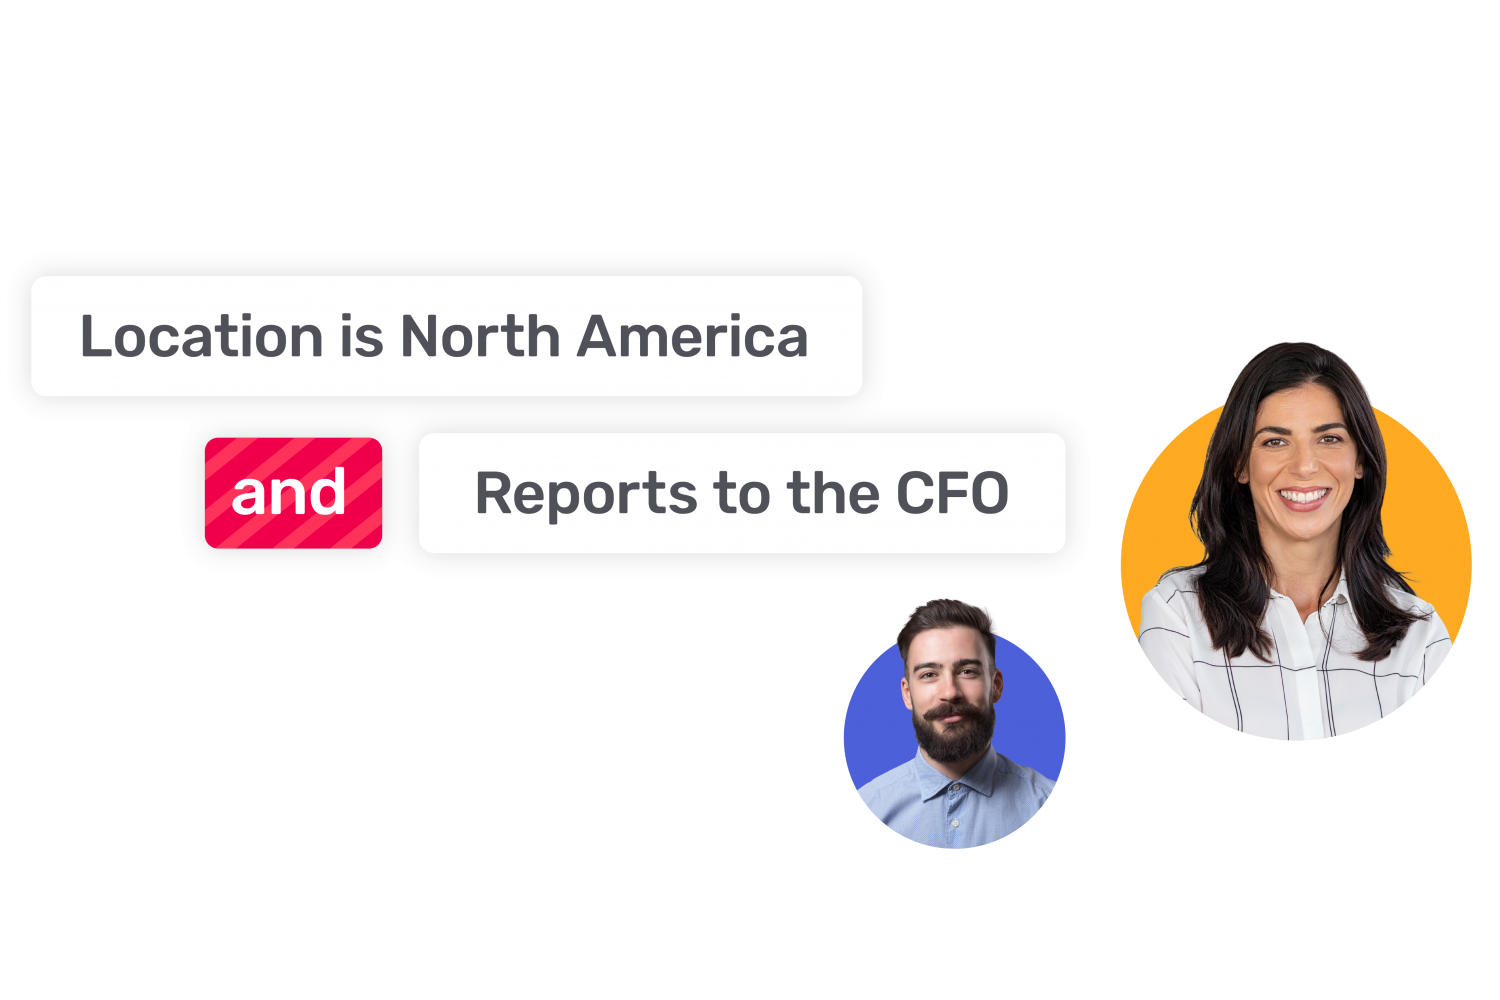 Two employees who are in the segment where the location is North America and they report to the CFO